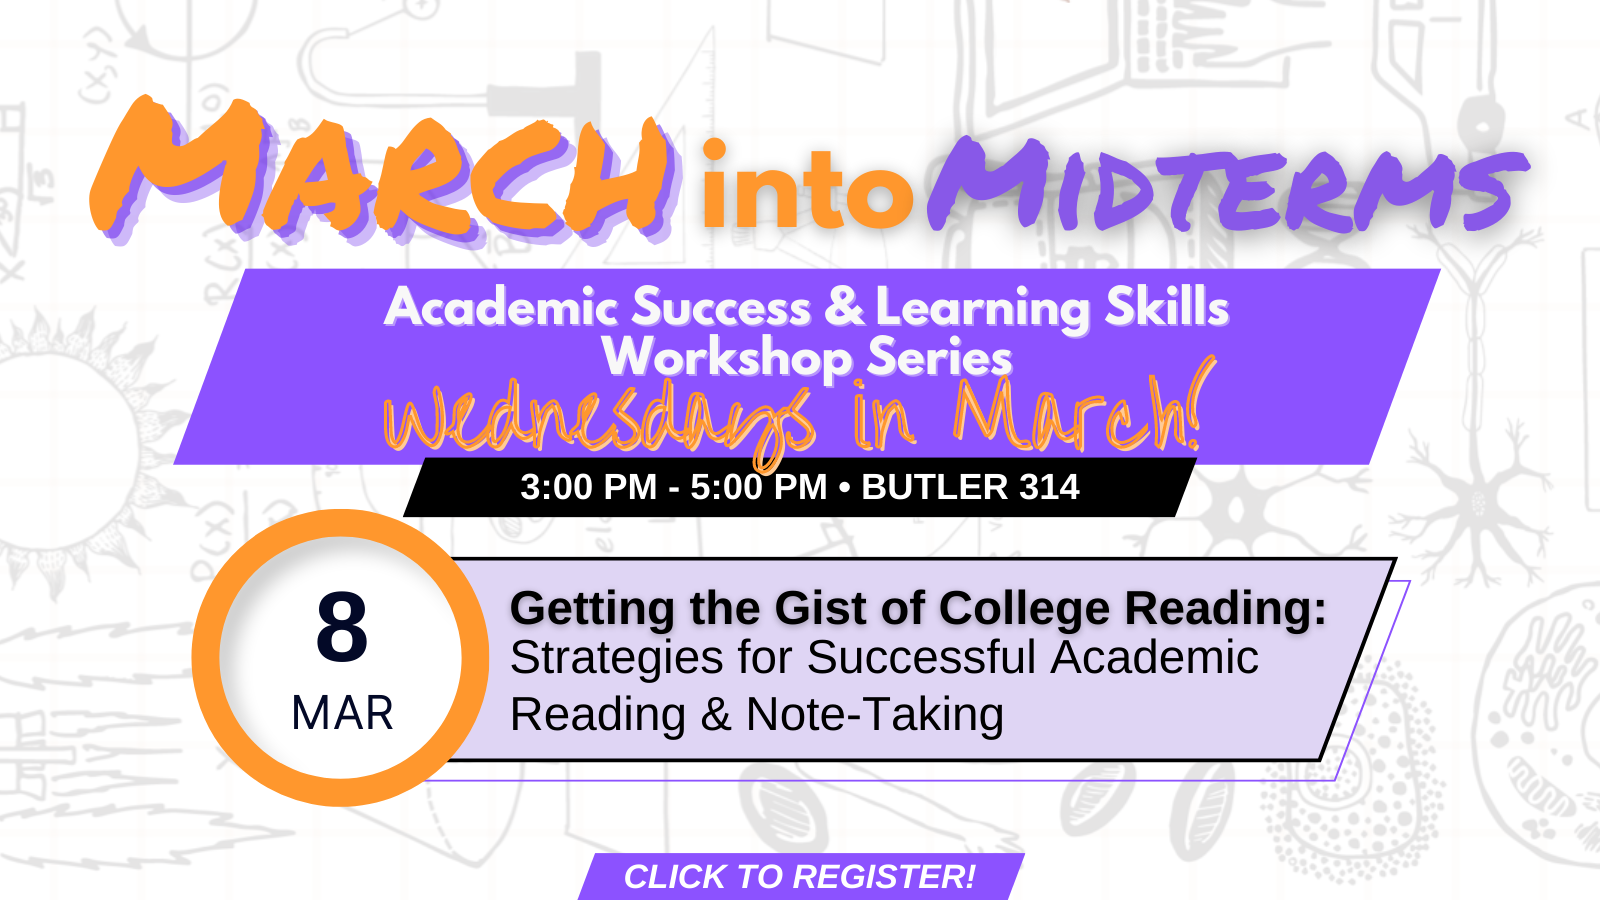 Flyer for March into Midterms workshop. Getting the gist of college reading: Strategies for successful academic reading and note-taking. March 8, 3 to 5pm in Butler 314. Workshops are every Wednesday in March. Click image to register.